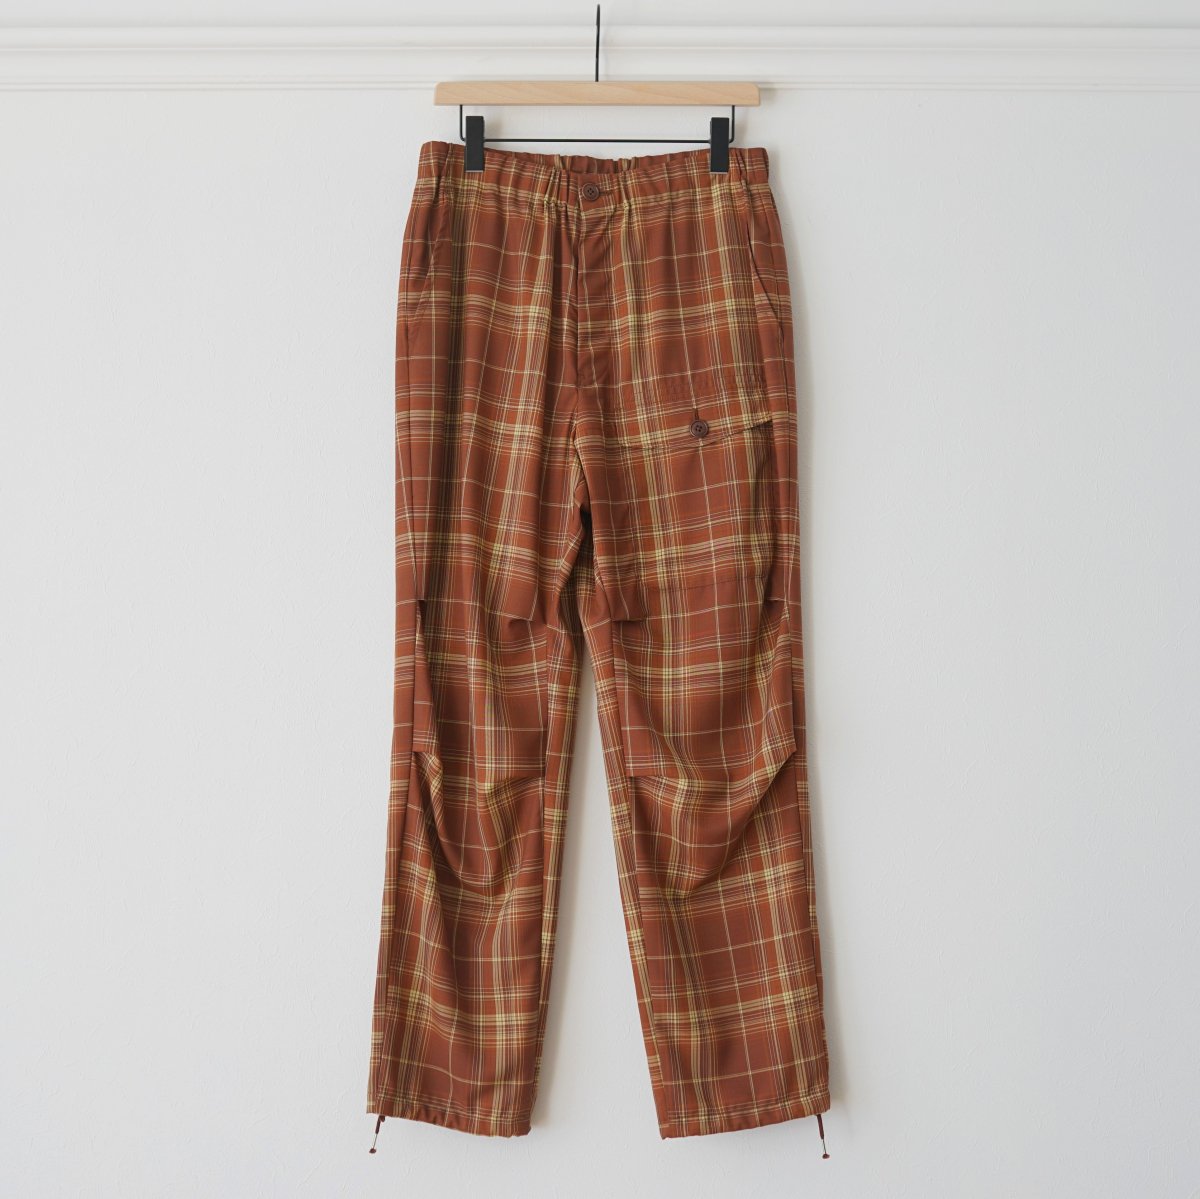 【WELLDER ウェルダー】TAPERD CARGO TROUSERS - BROWN